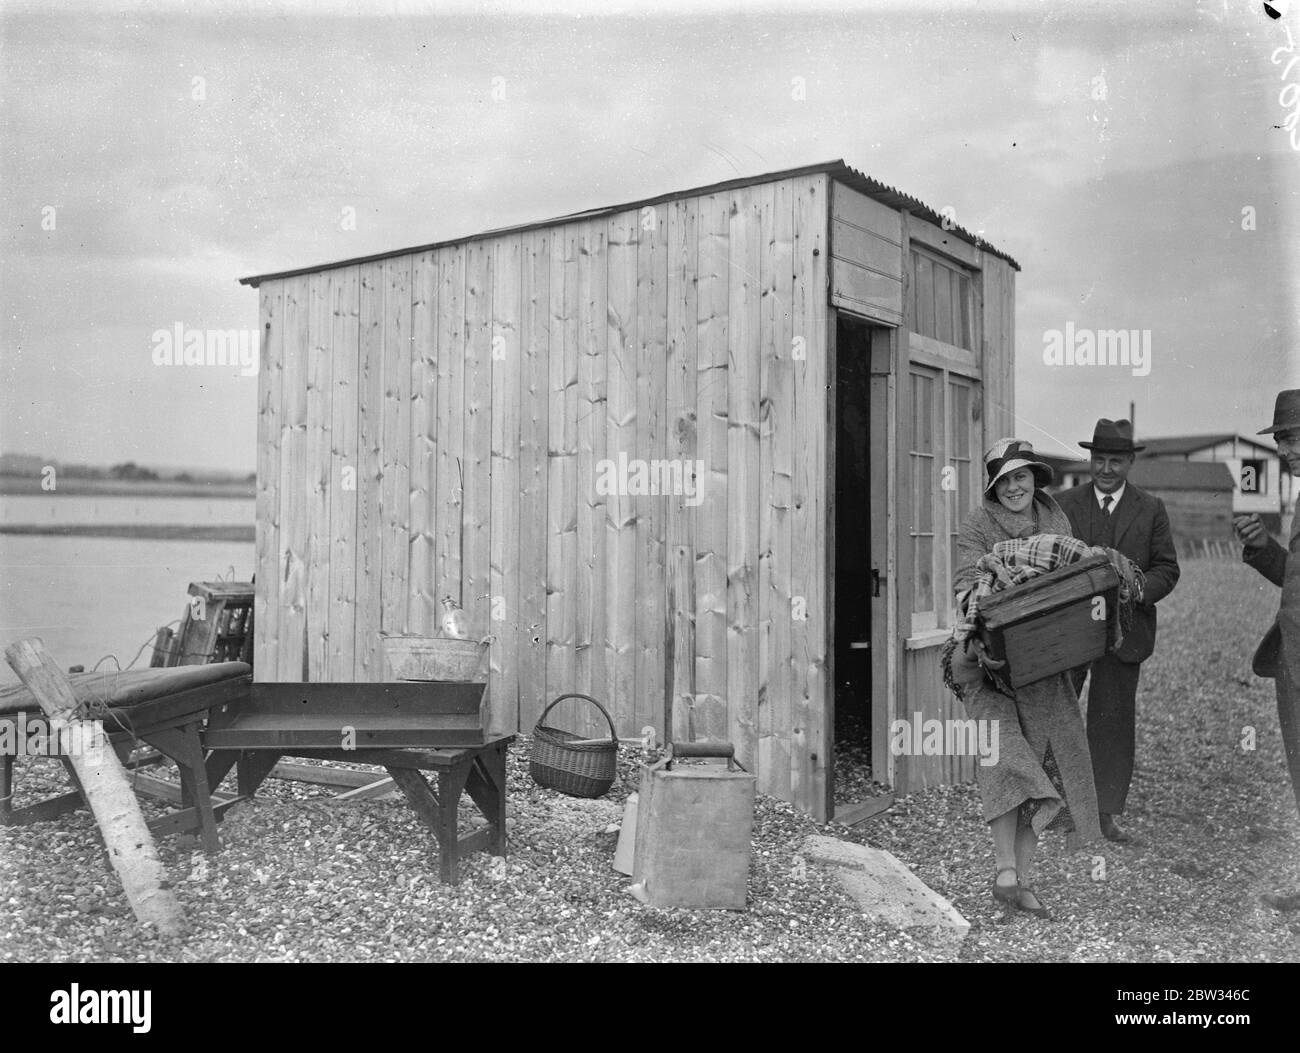 Sea defences broken by flood tide at Winchelsea , bungalows flooded and holidaymakers marooned . The sea defences for a distance of 75 yards along the coast at Winchelsea , Sussex gave way before a flood tide , and a surging torrent of sea water flooded acres of marsh land along the coast , inundating bungalows and marooning holidaymakers . Great efforts are being made to repair the breach before the next tide . 4 September 1932 Stock Photo